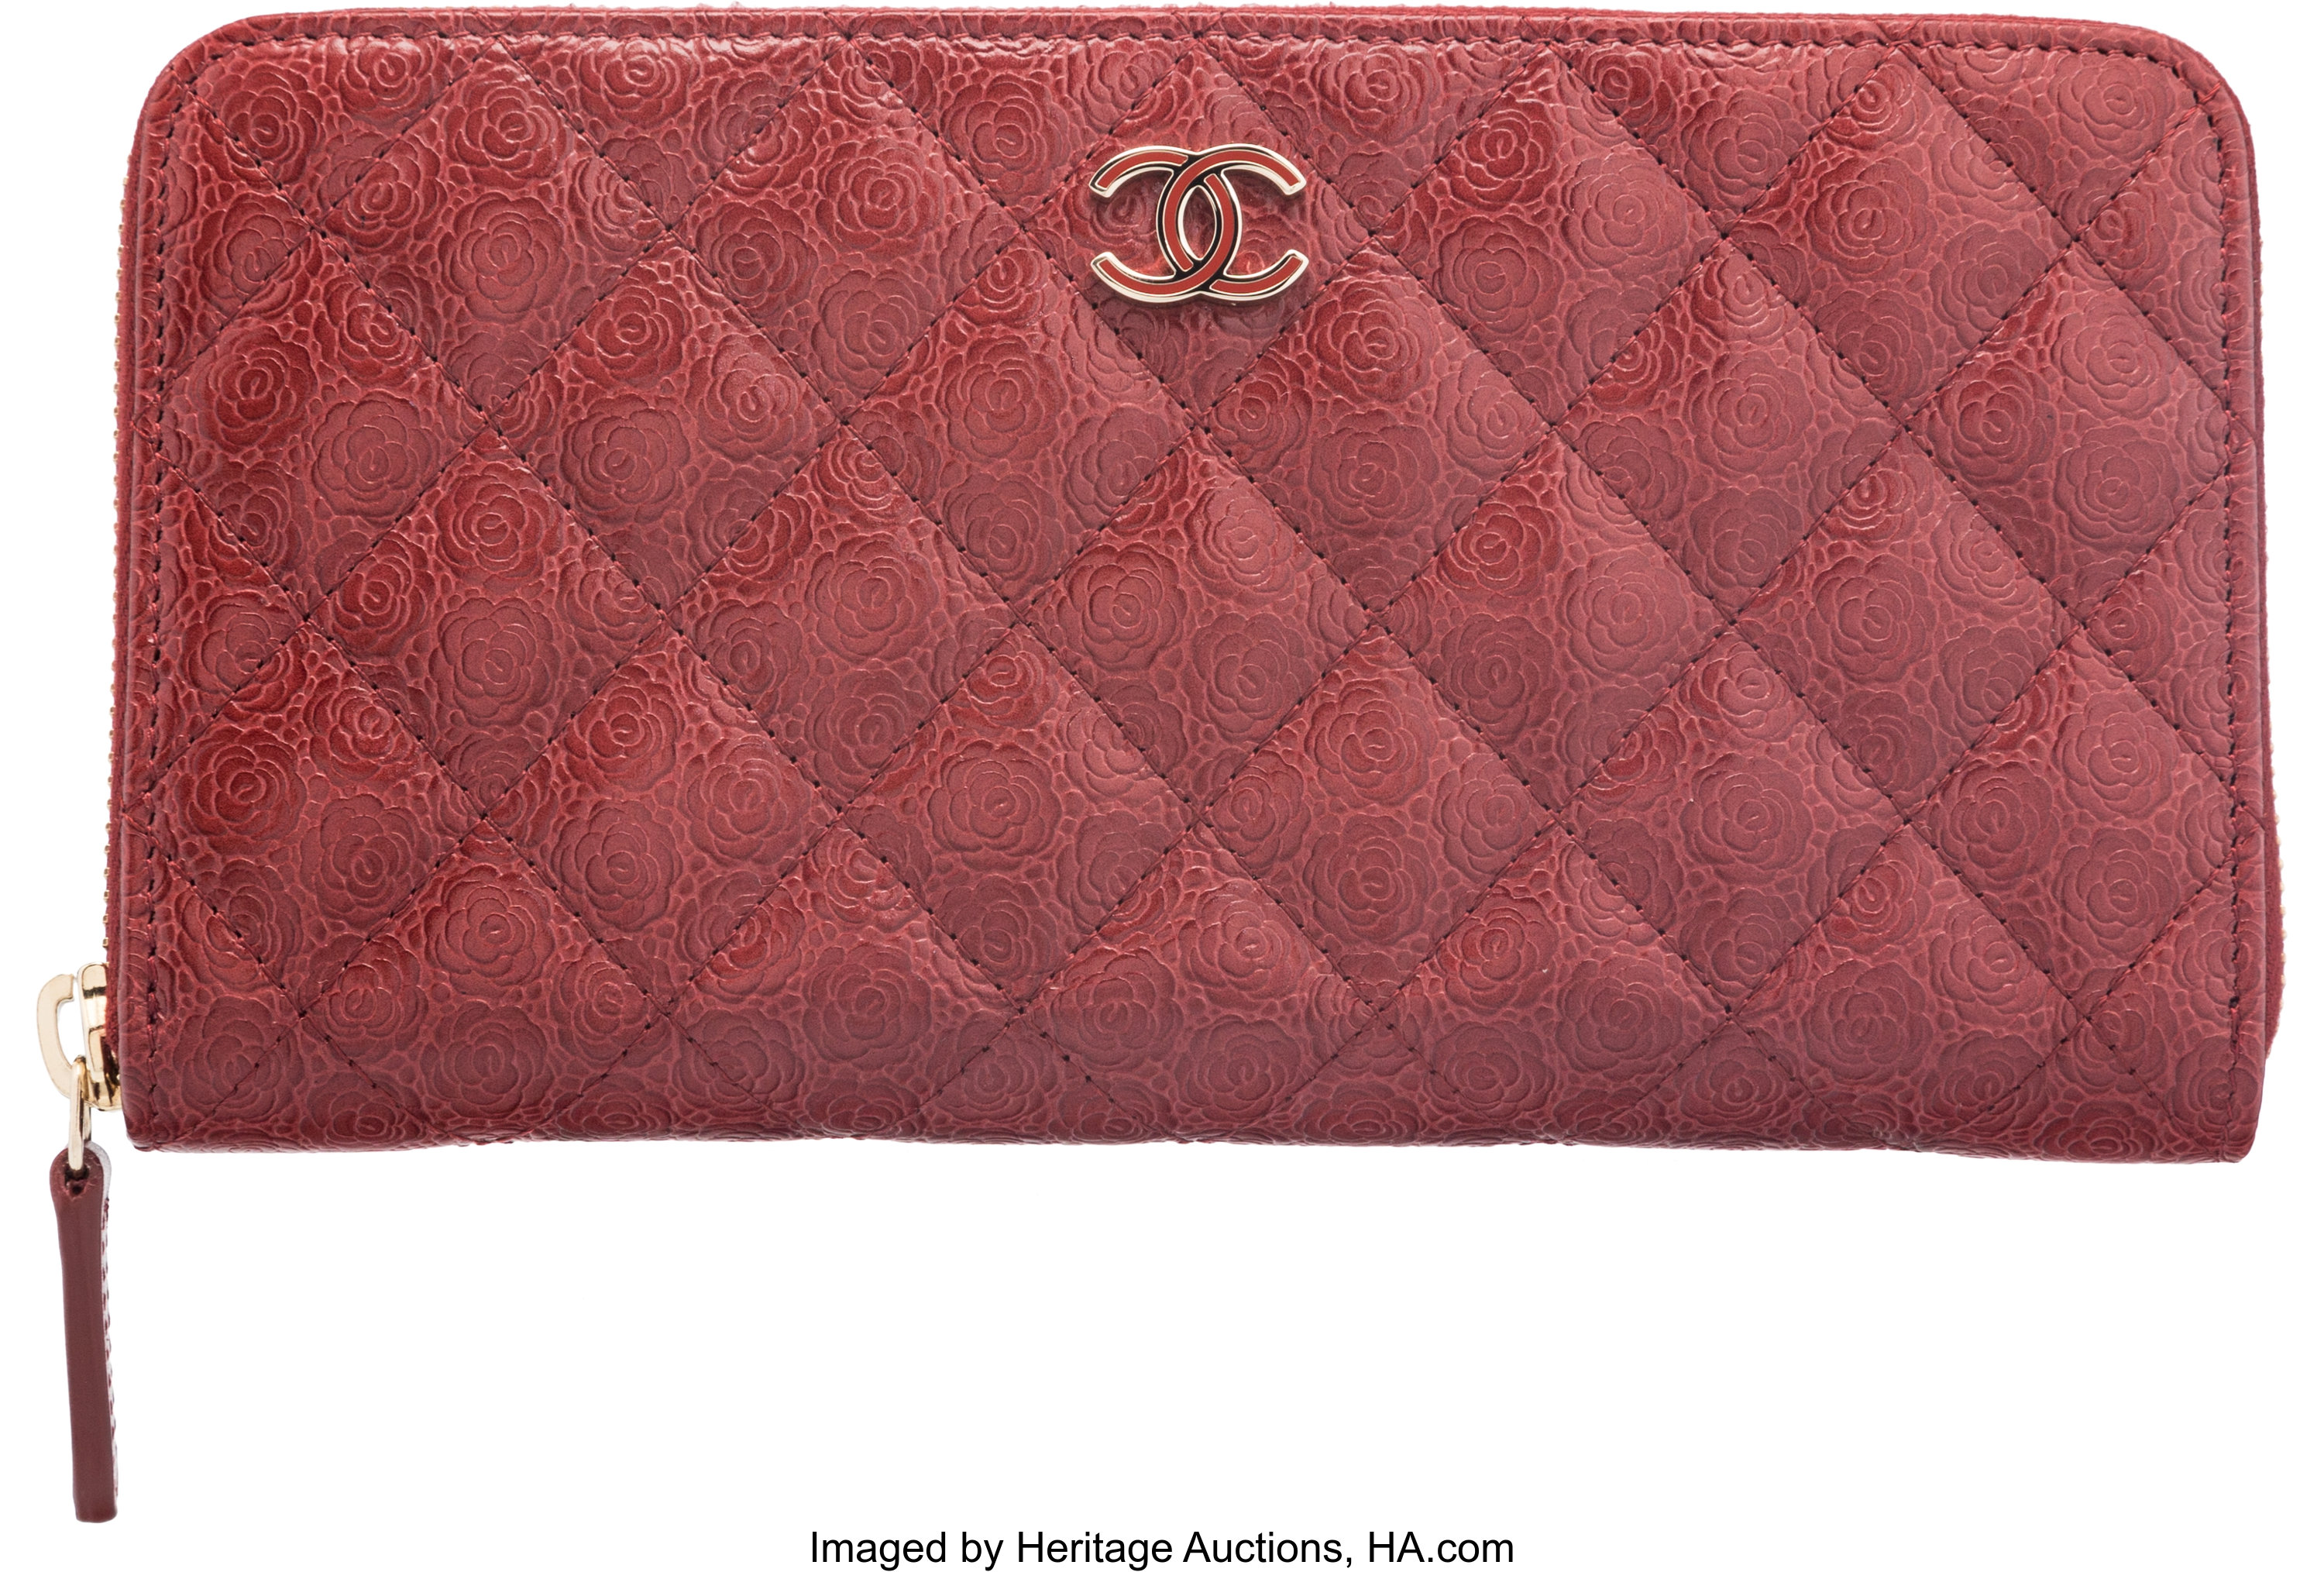 Sold at Auction: Chanel Plum Chocolate Bar East West Flap Bag